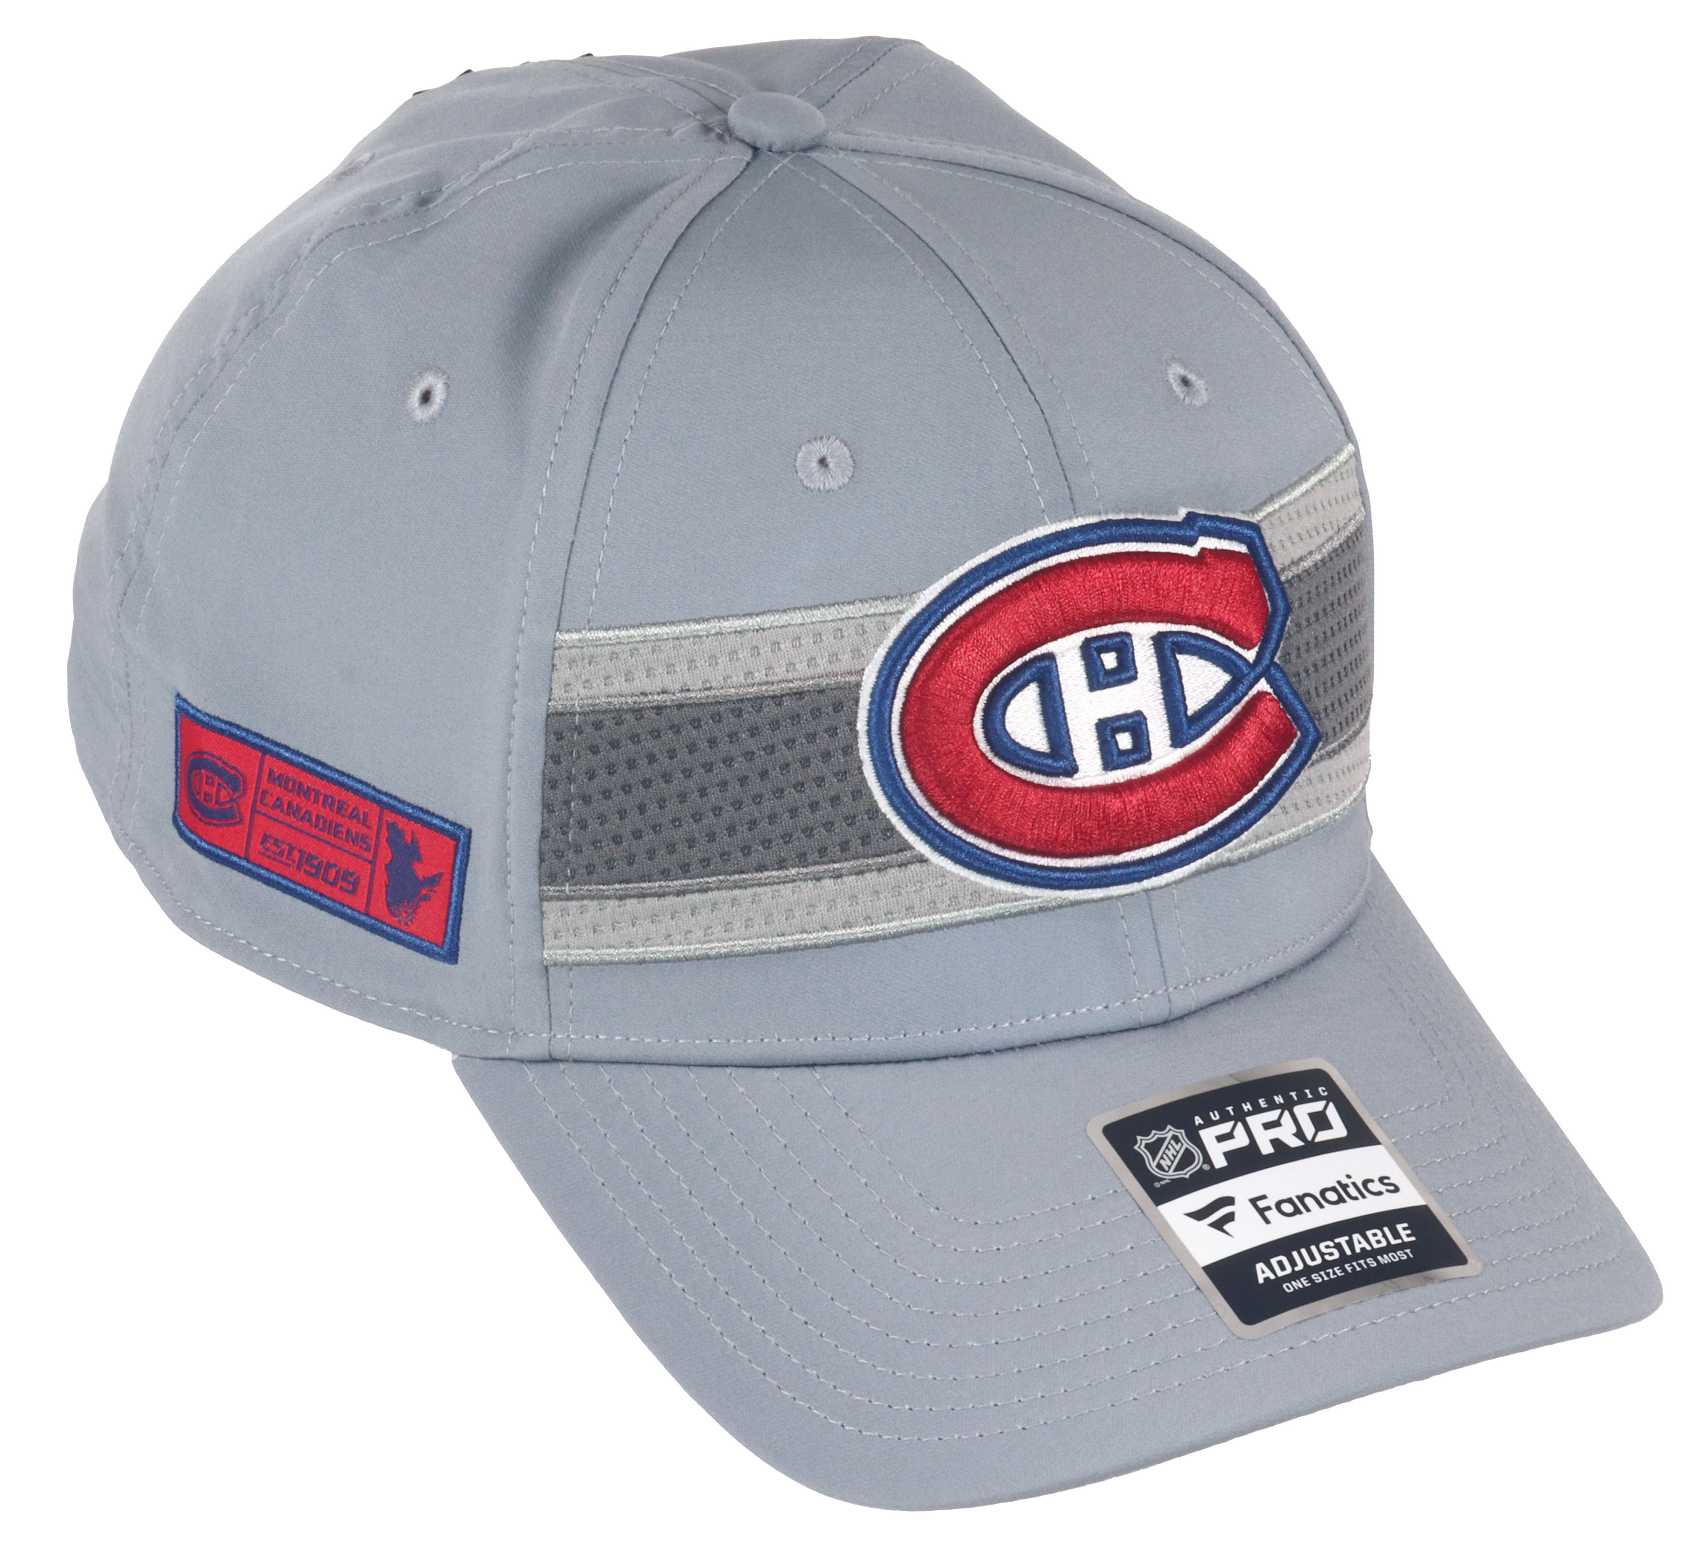 Montreal Canadiens NHL Authentic Pro Home Ice Structured Curved Snapback Cap Grey Fanatics